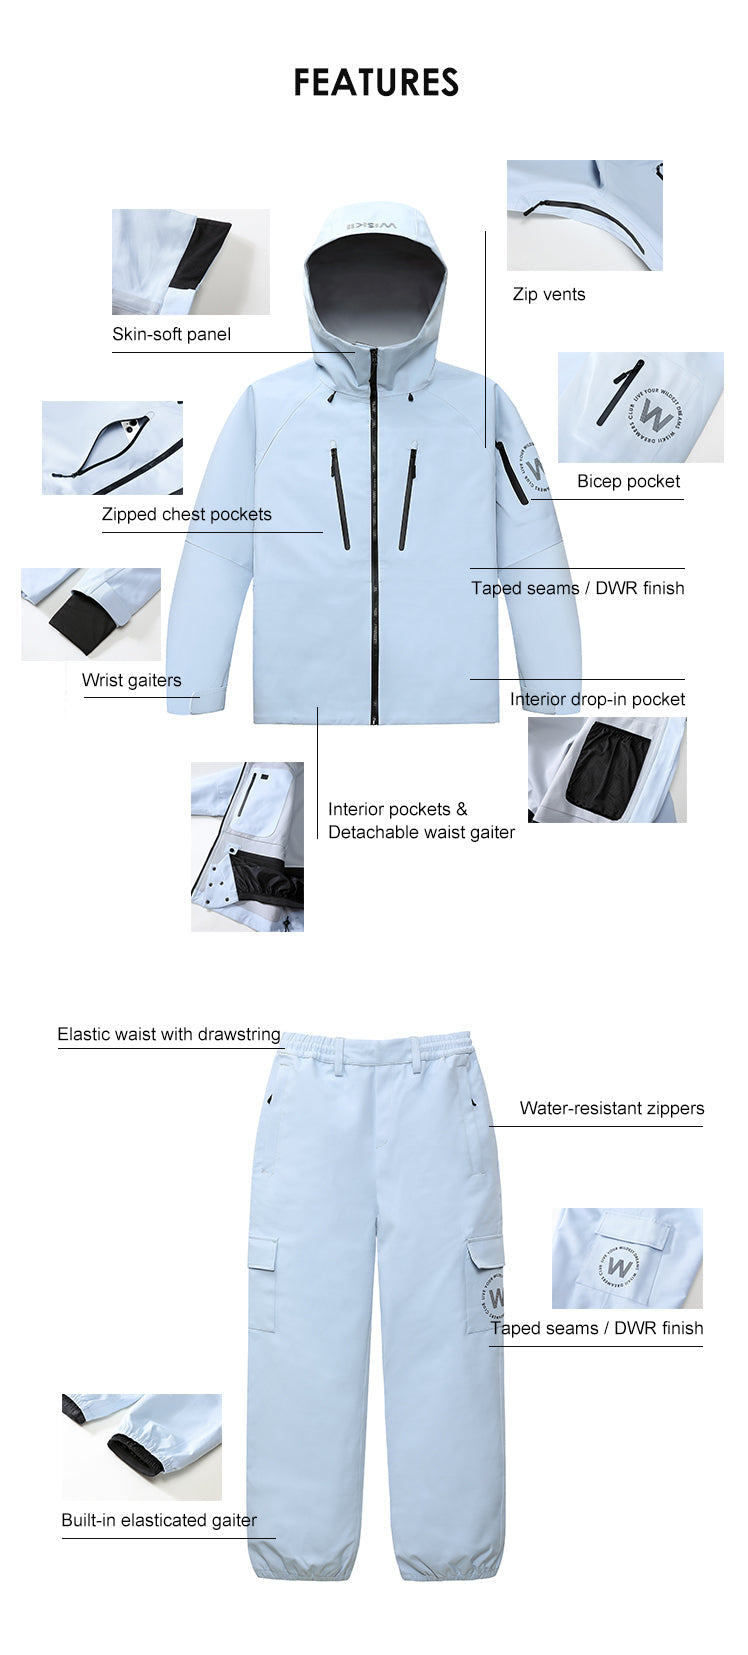 Features details about WISKII 3L Waterproof Hardshell Performance Jacket